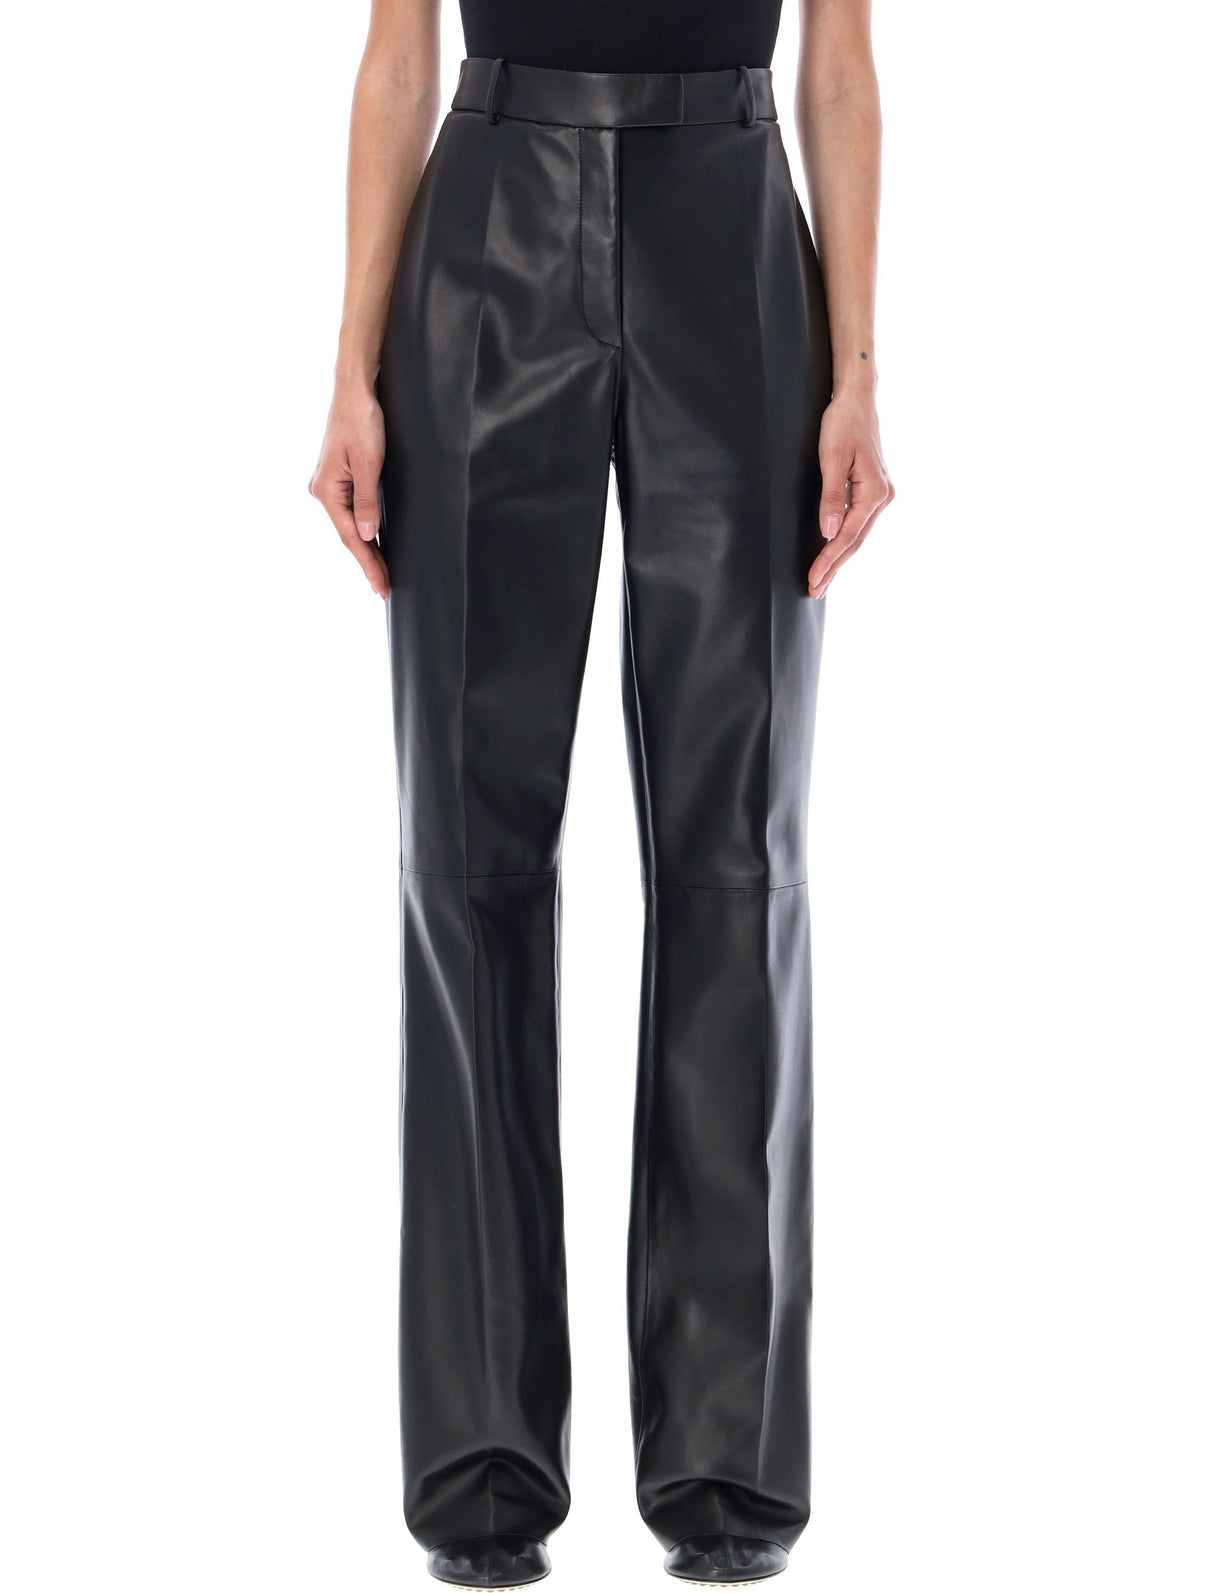 Genuine Leather Pants for Women by a Top Luxury Designer